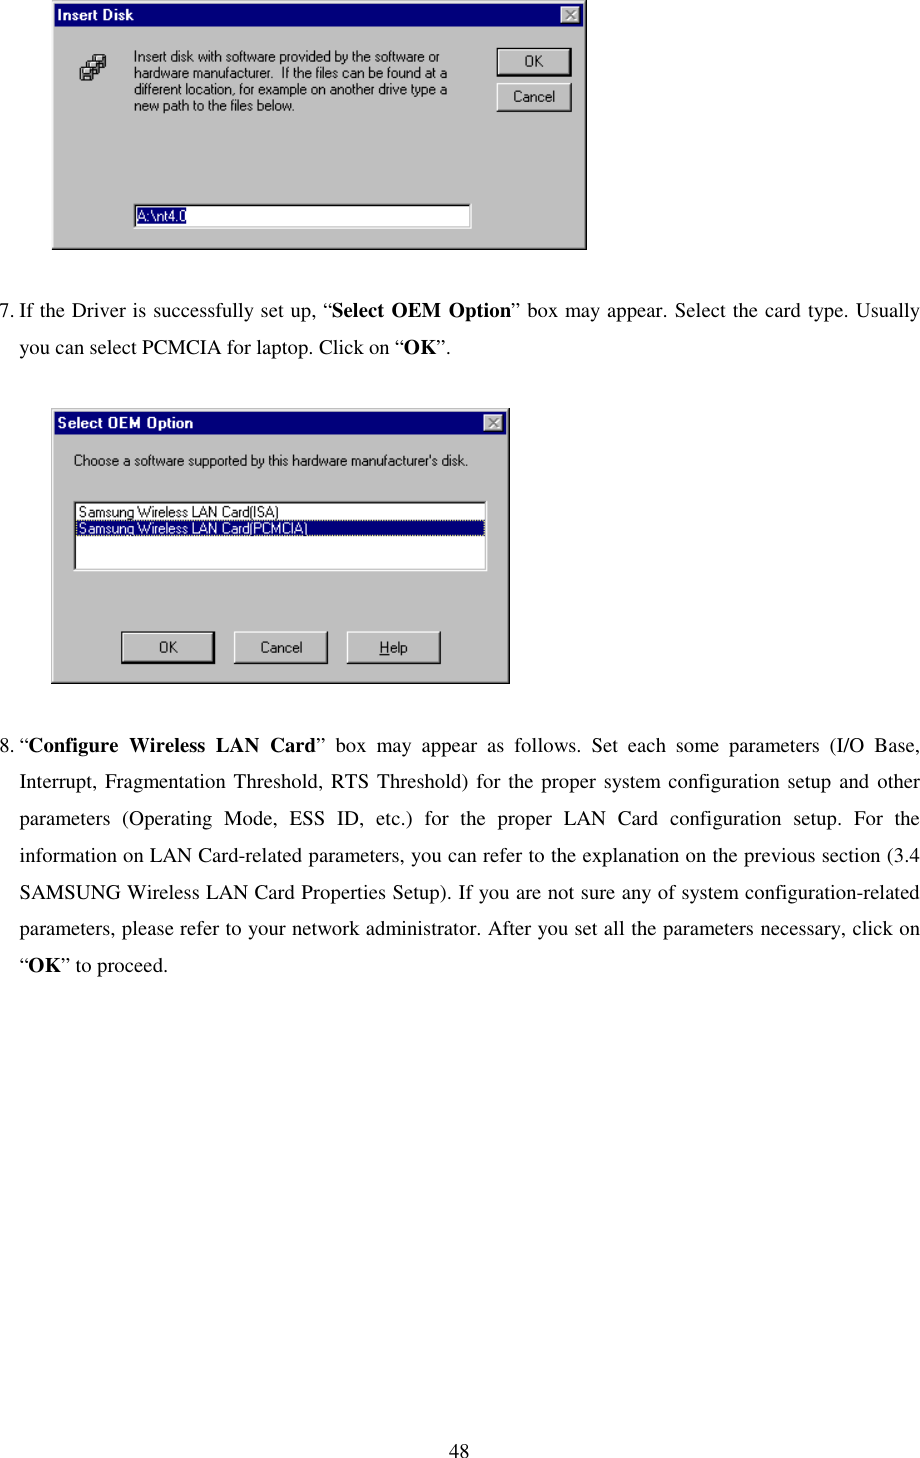   48              7. If the Driver is successfully set up, “Select OEM Option” box may appear. Select the card type. Usually you can select PCMCIA for laptop. Click on “OK”.                8. “Configure Wireless LAN Card” box may appear as follows. Set each some parameters (I/O Base, Interrupt, Fragmentation Threshold, RTS Threshold) for the proper system configuration setup and other parameters (Operating Mode, ESS ID, etc.) for the proper LAN Card configuration setup. For the information on LAN Card-related parameters, you can refer to the explanation on the previous section (3.4 SAMSUNG Wireless LAN Card Properties Setup). If you are not sure any of system configuration-related parameters, please refer to your network administrator. After you set all the parameters necessary, click on “OK” to proceed.  